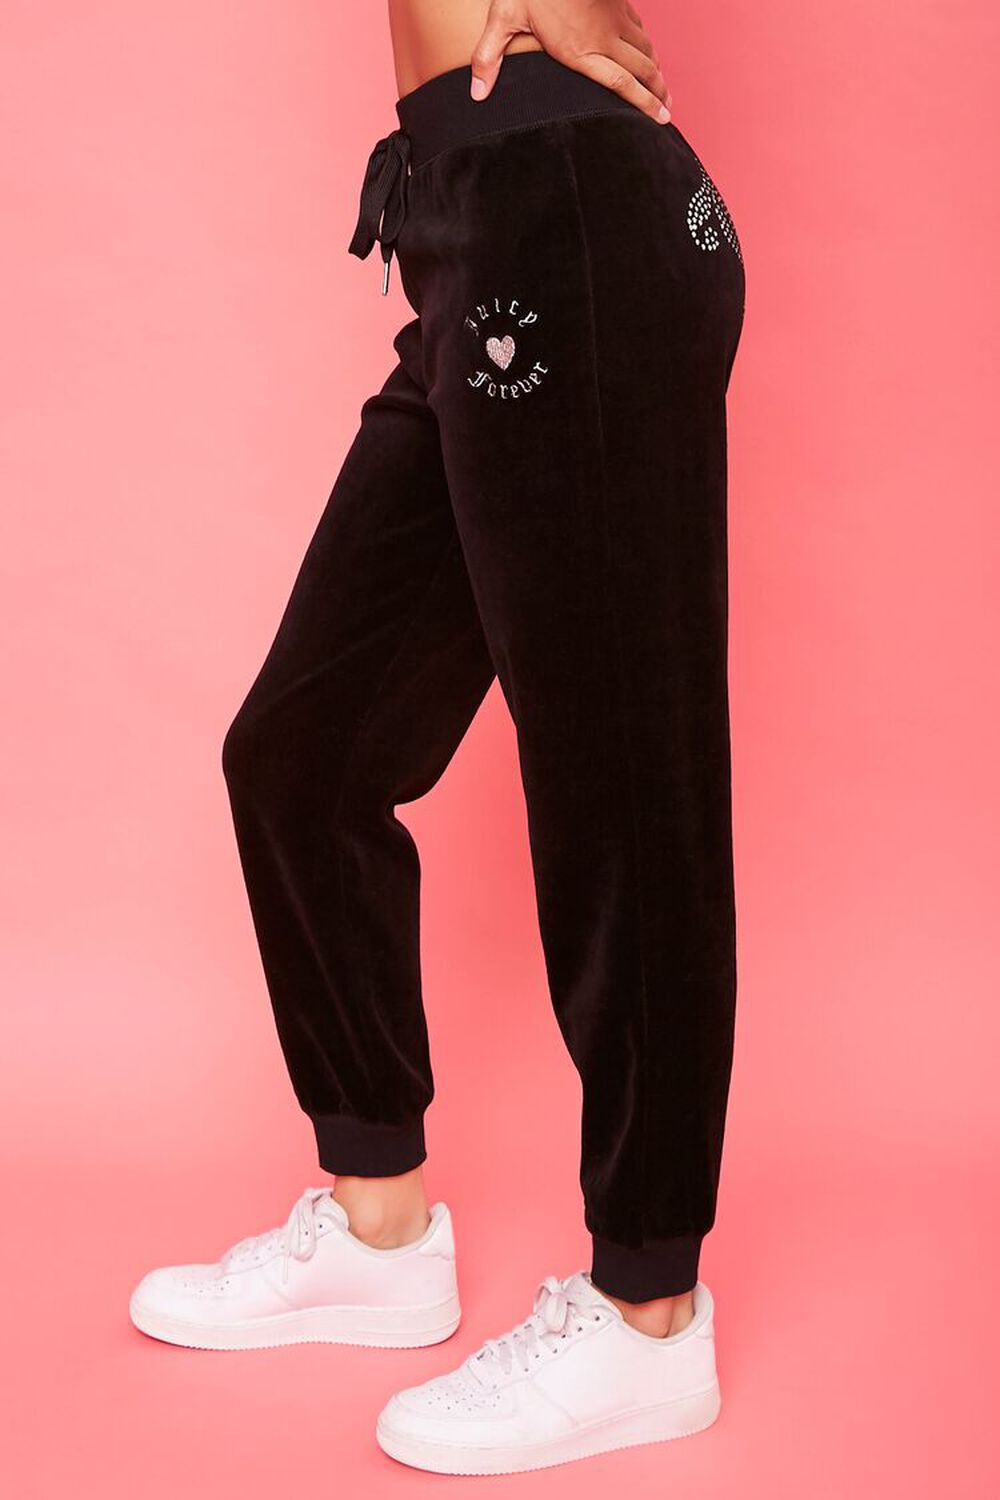 BLACK/SILVER Rhinestone Juicy Couture Velour Joggers, image 3